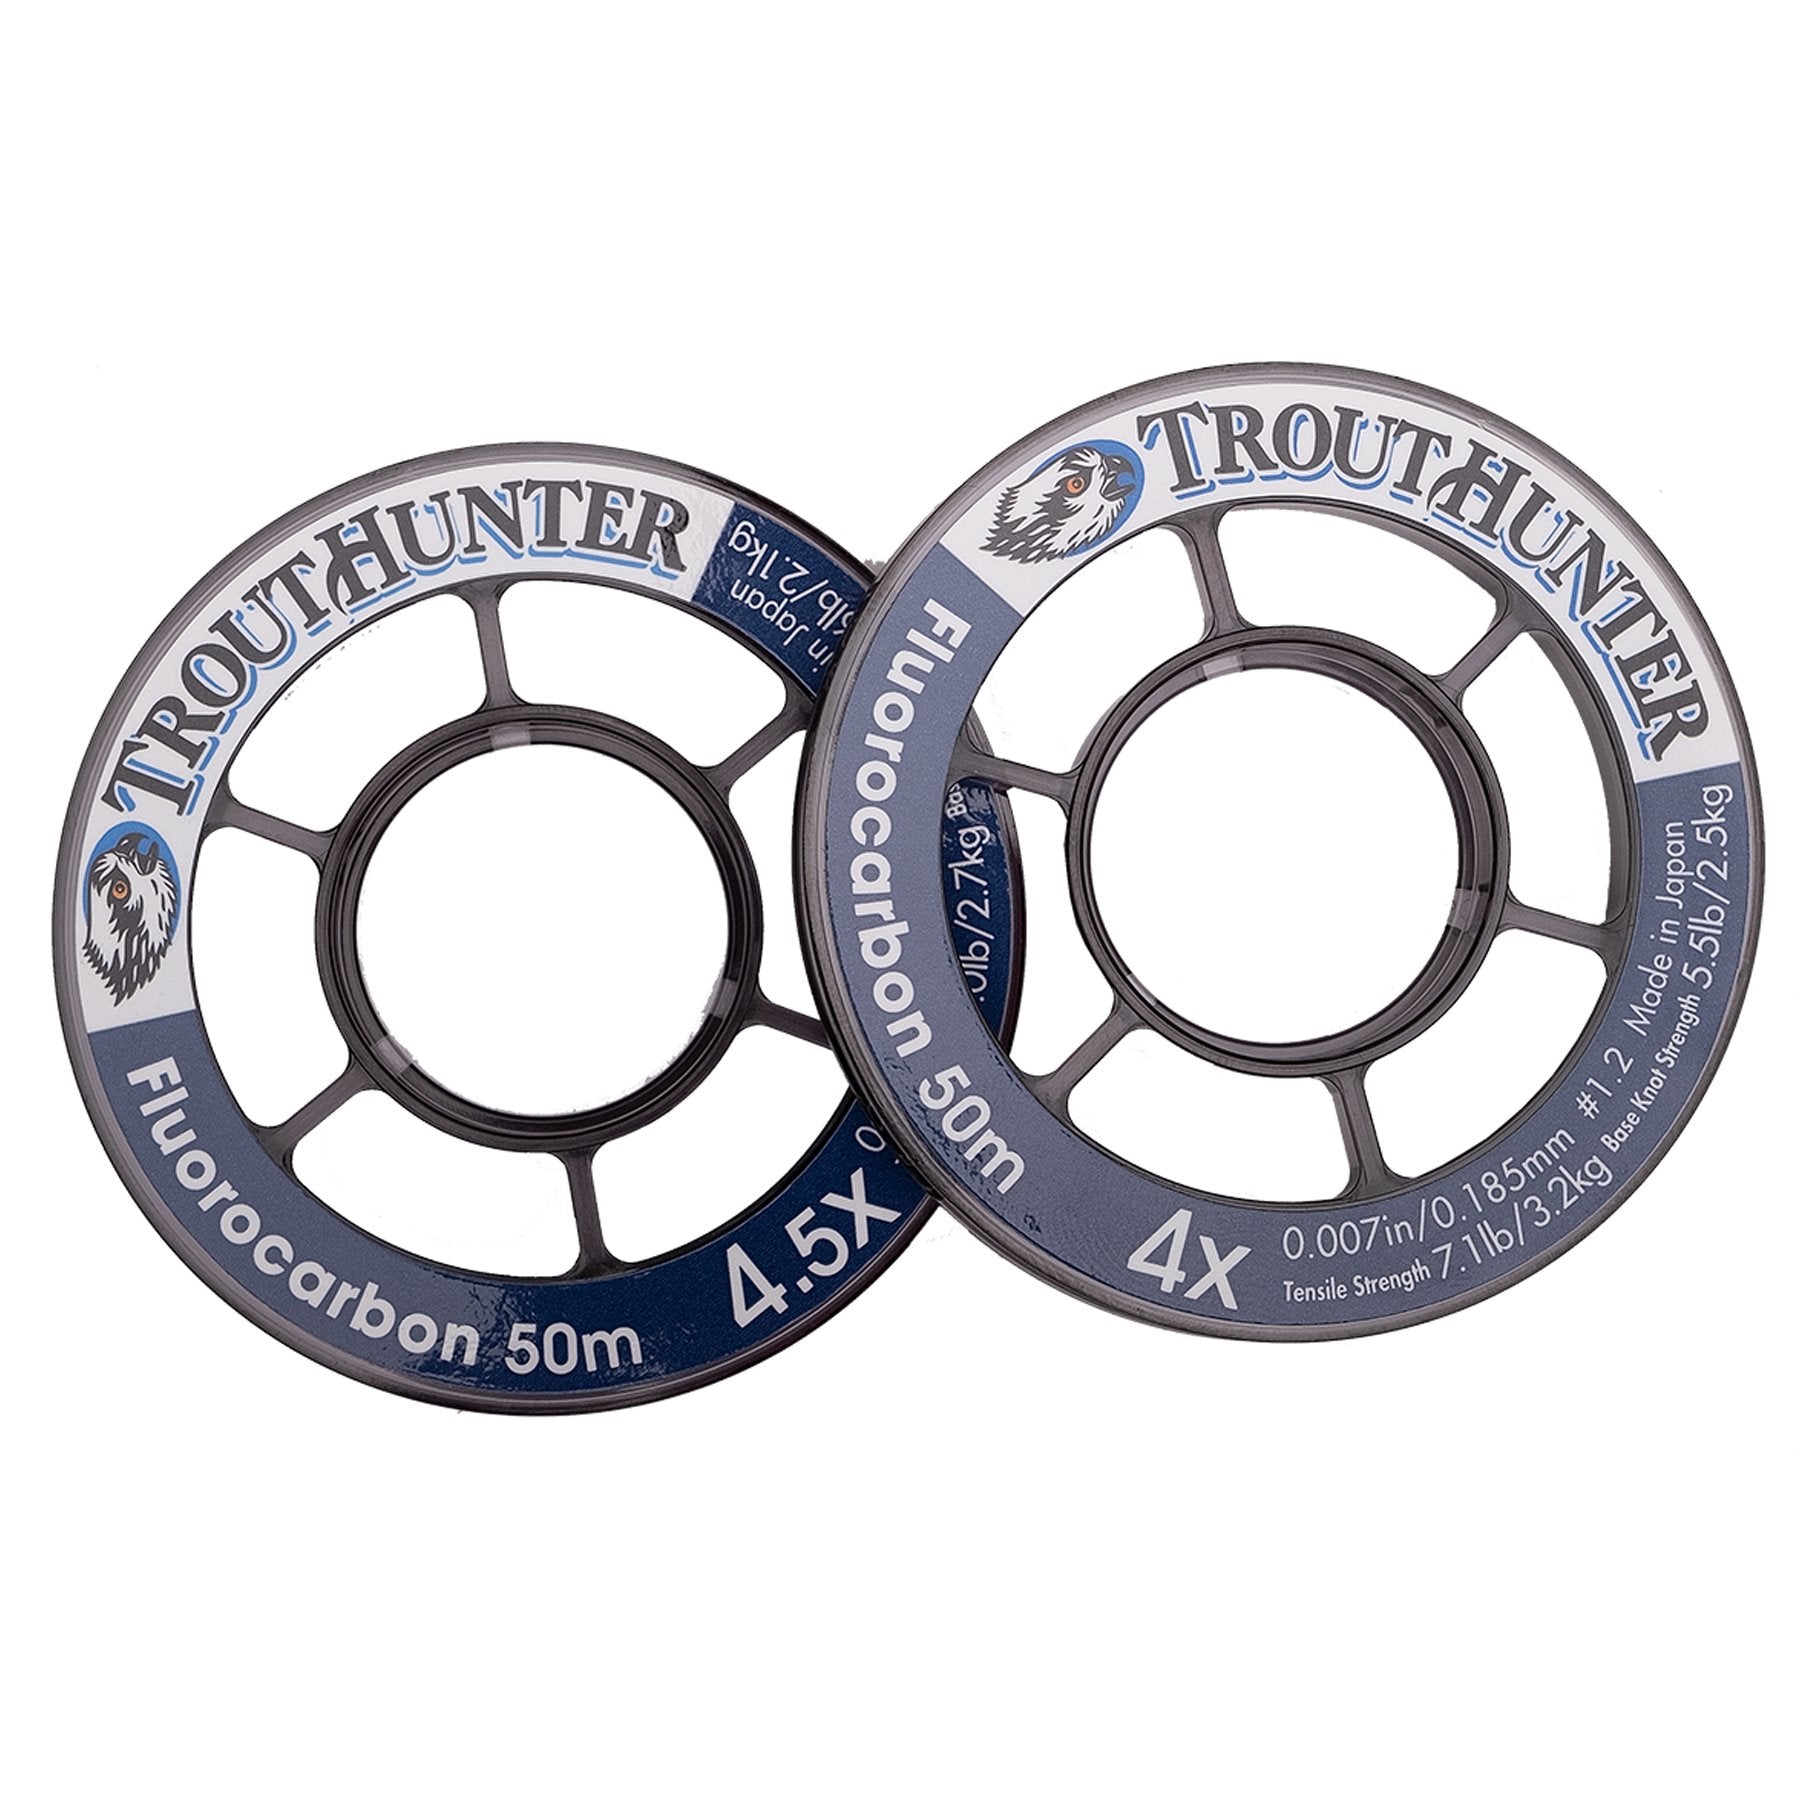 TroutHunter Fluorocarbon Tippet 50 meters 